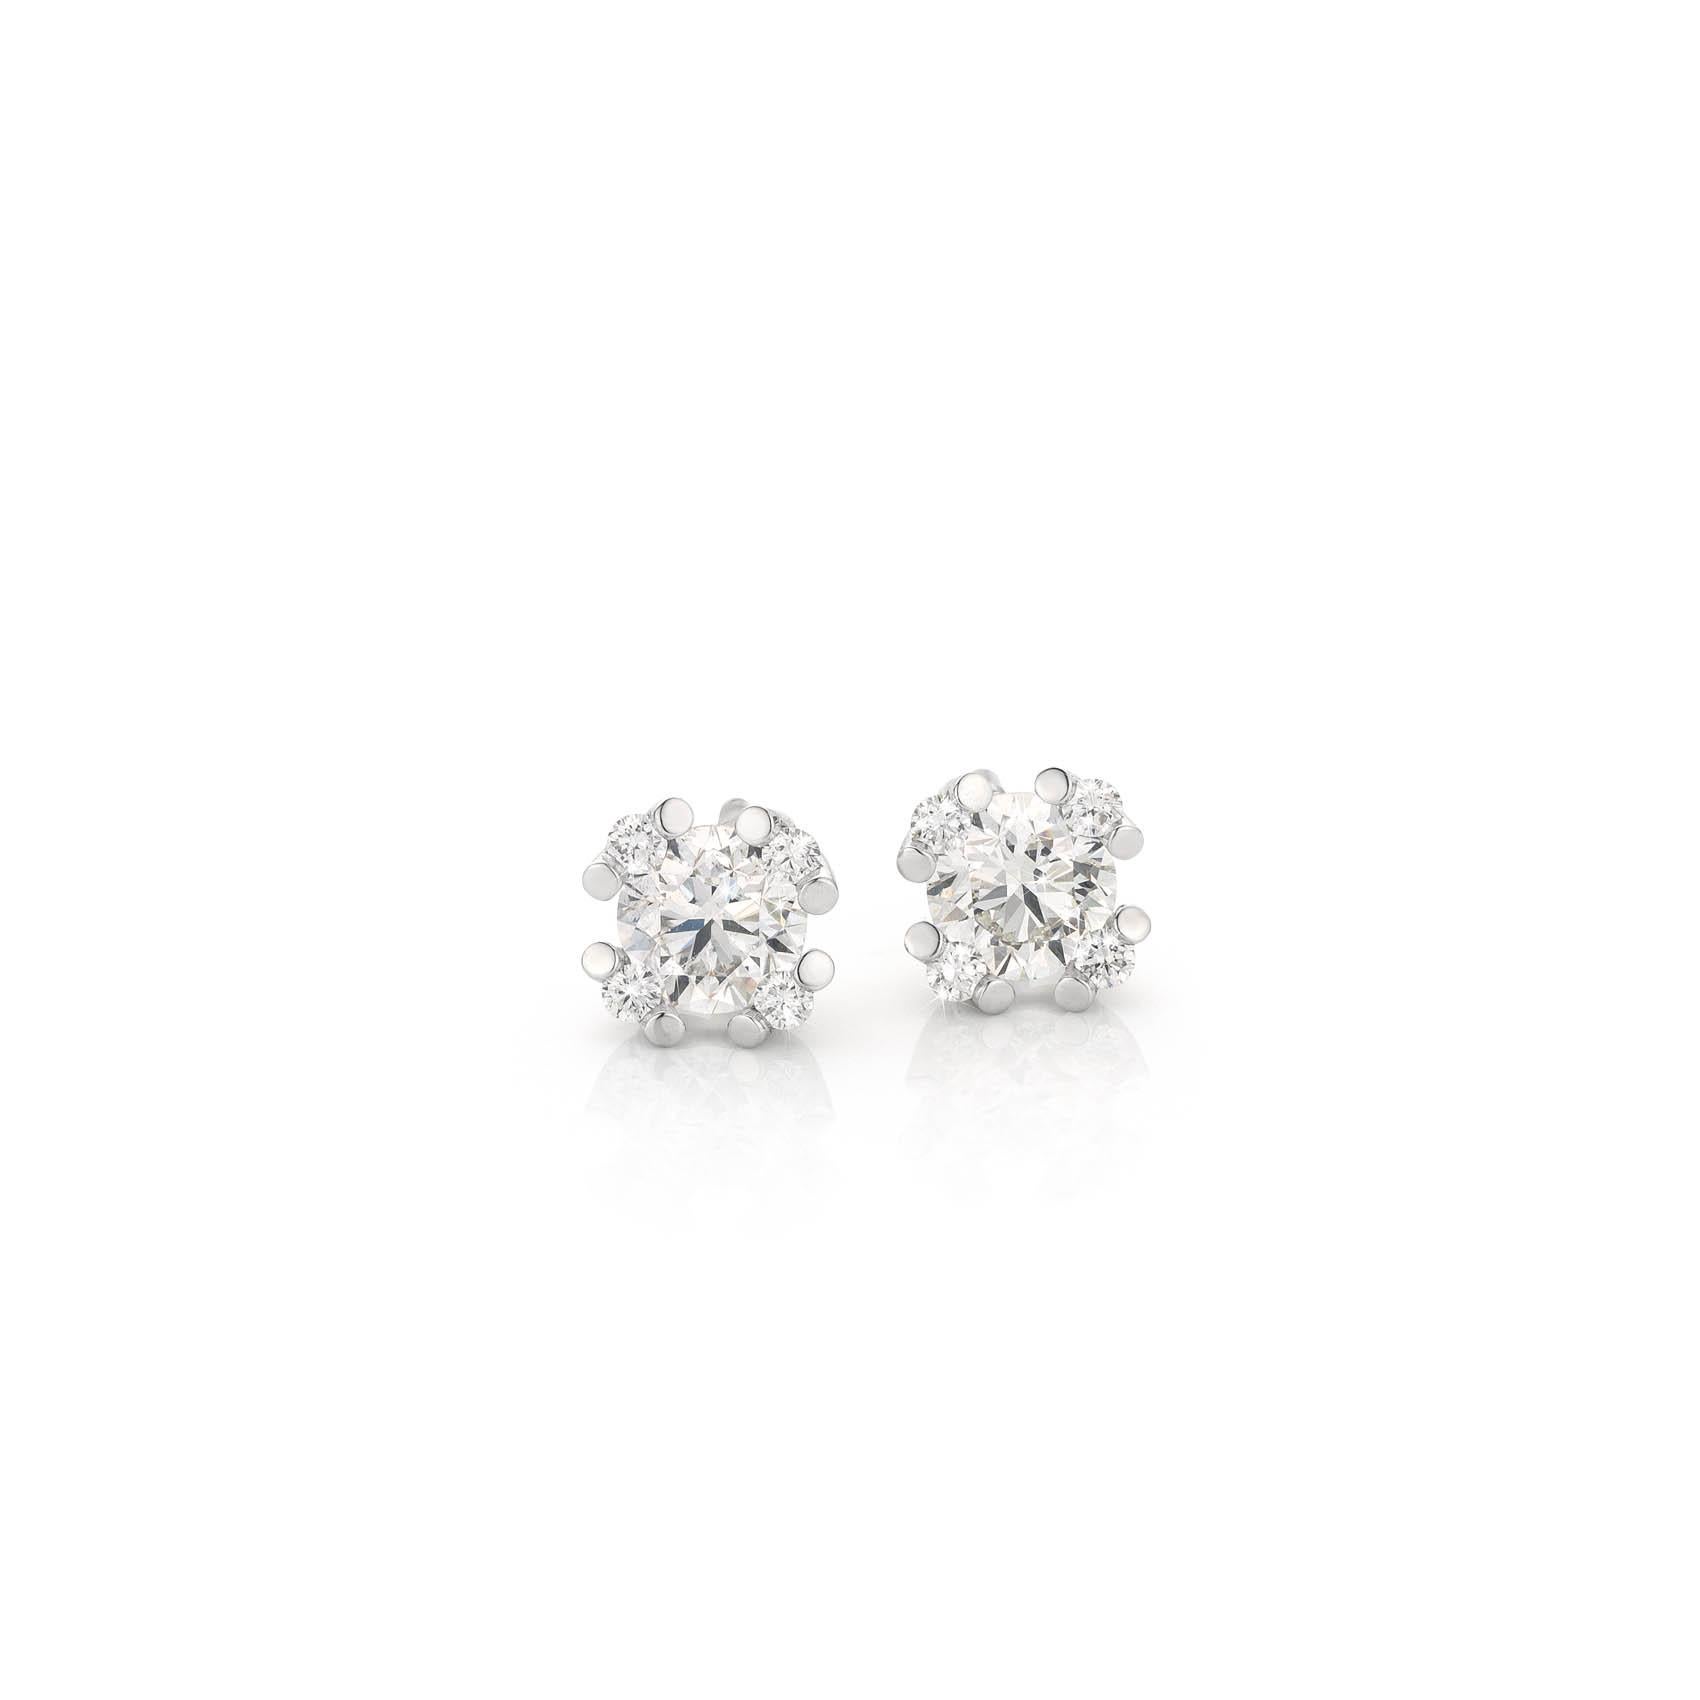 Contemporary Cober “Dancing with the stars white” with a central 0.50 Carat Diamond Ear studs For Sale